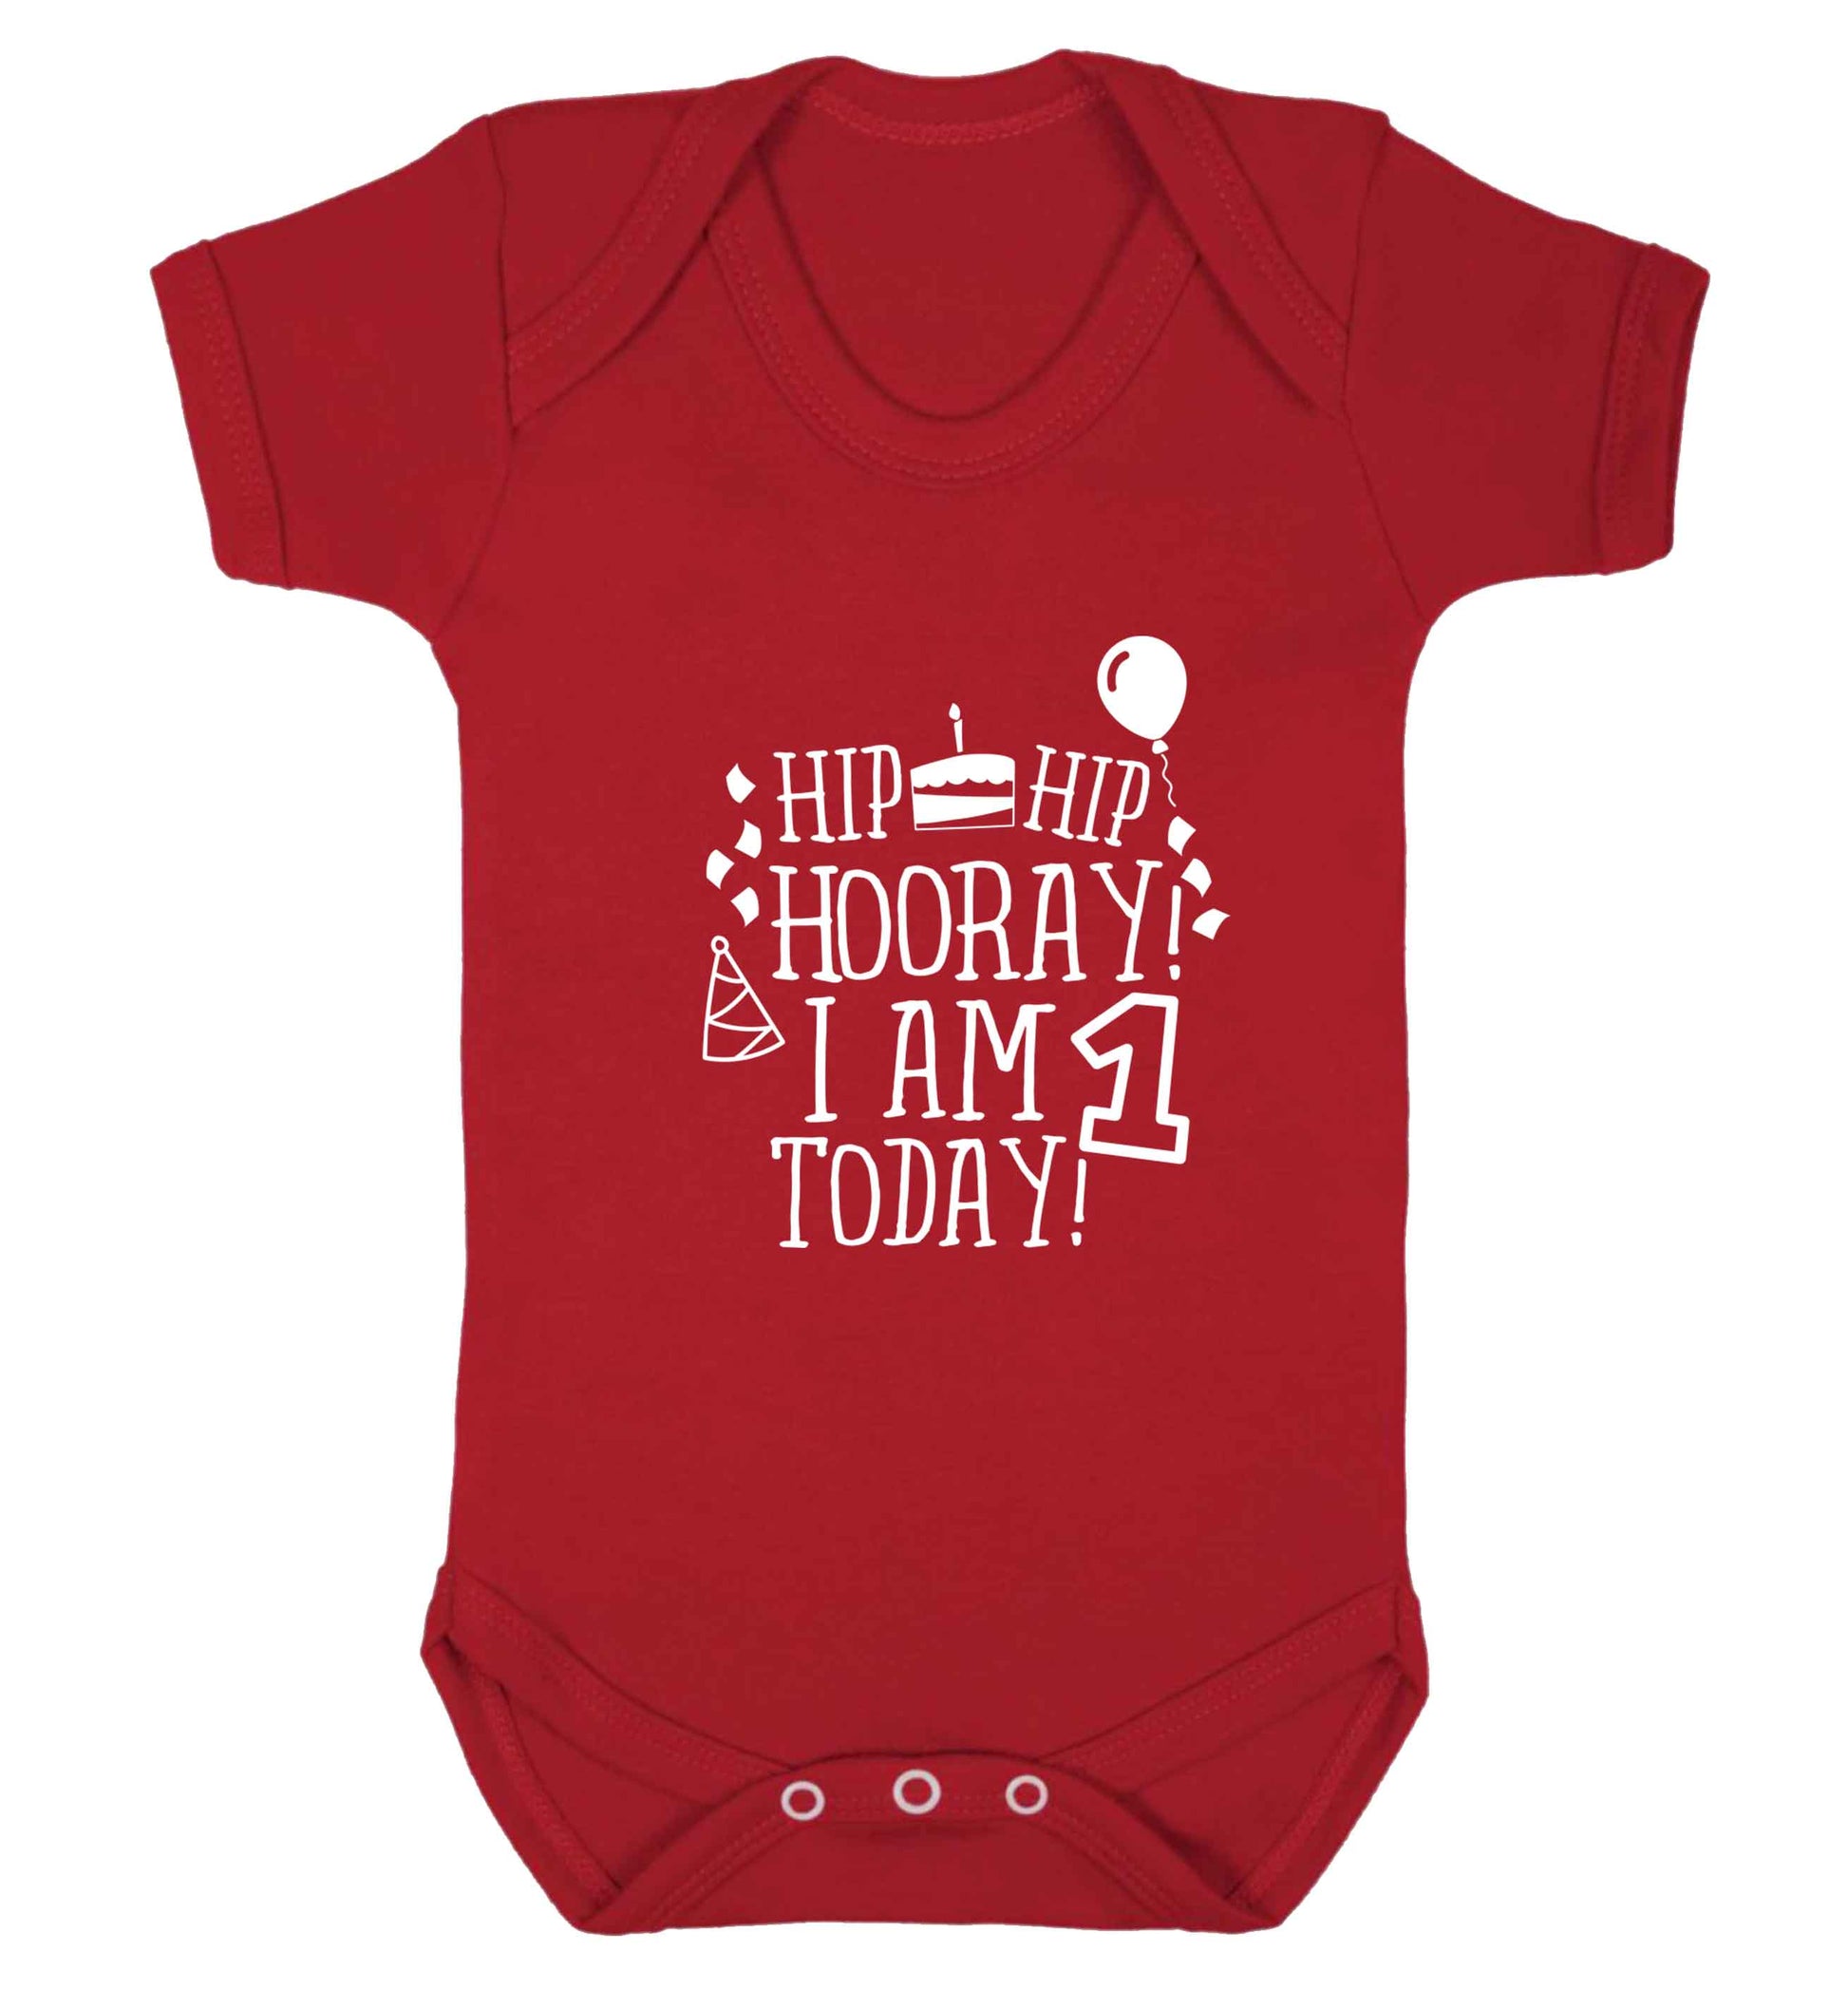 I am One Today baby vest red 18-24 months